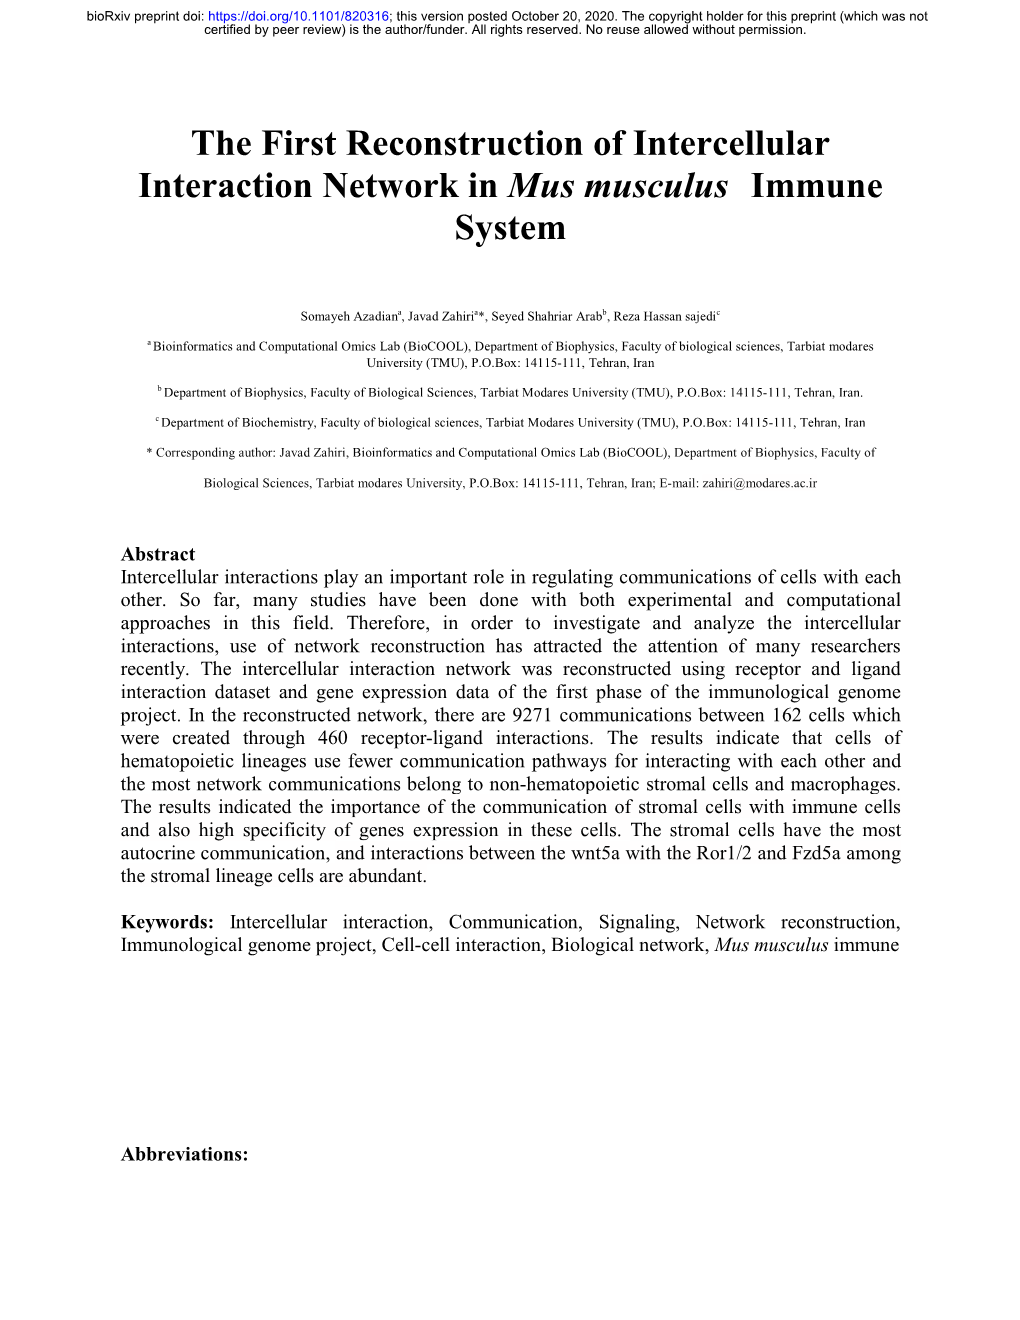 The First Reconstruction of Intercellular Interaction Network in Mus Musculus Immune System